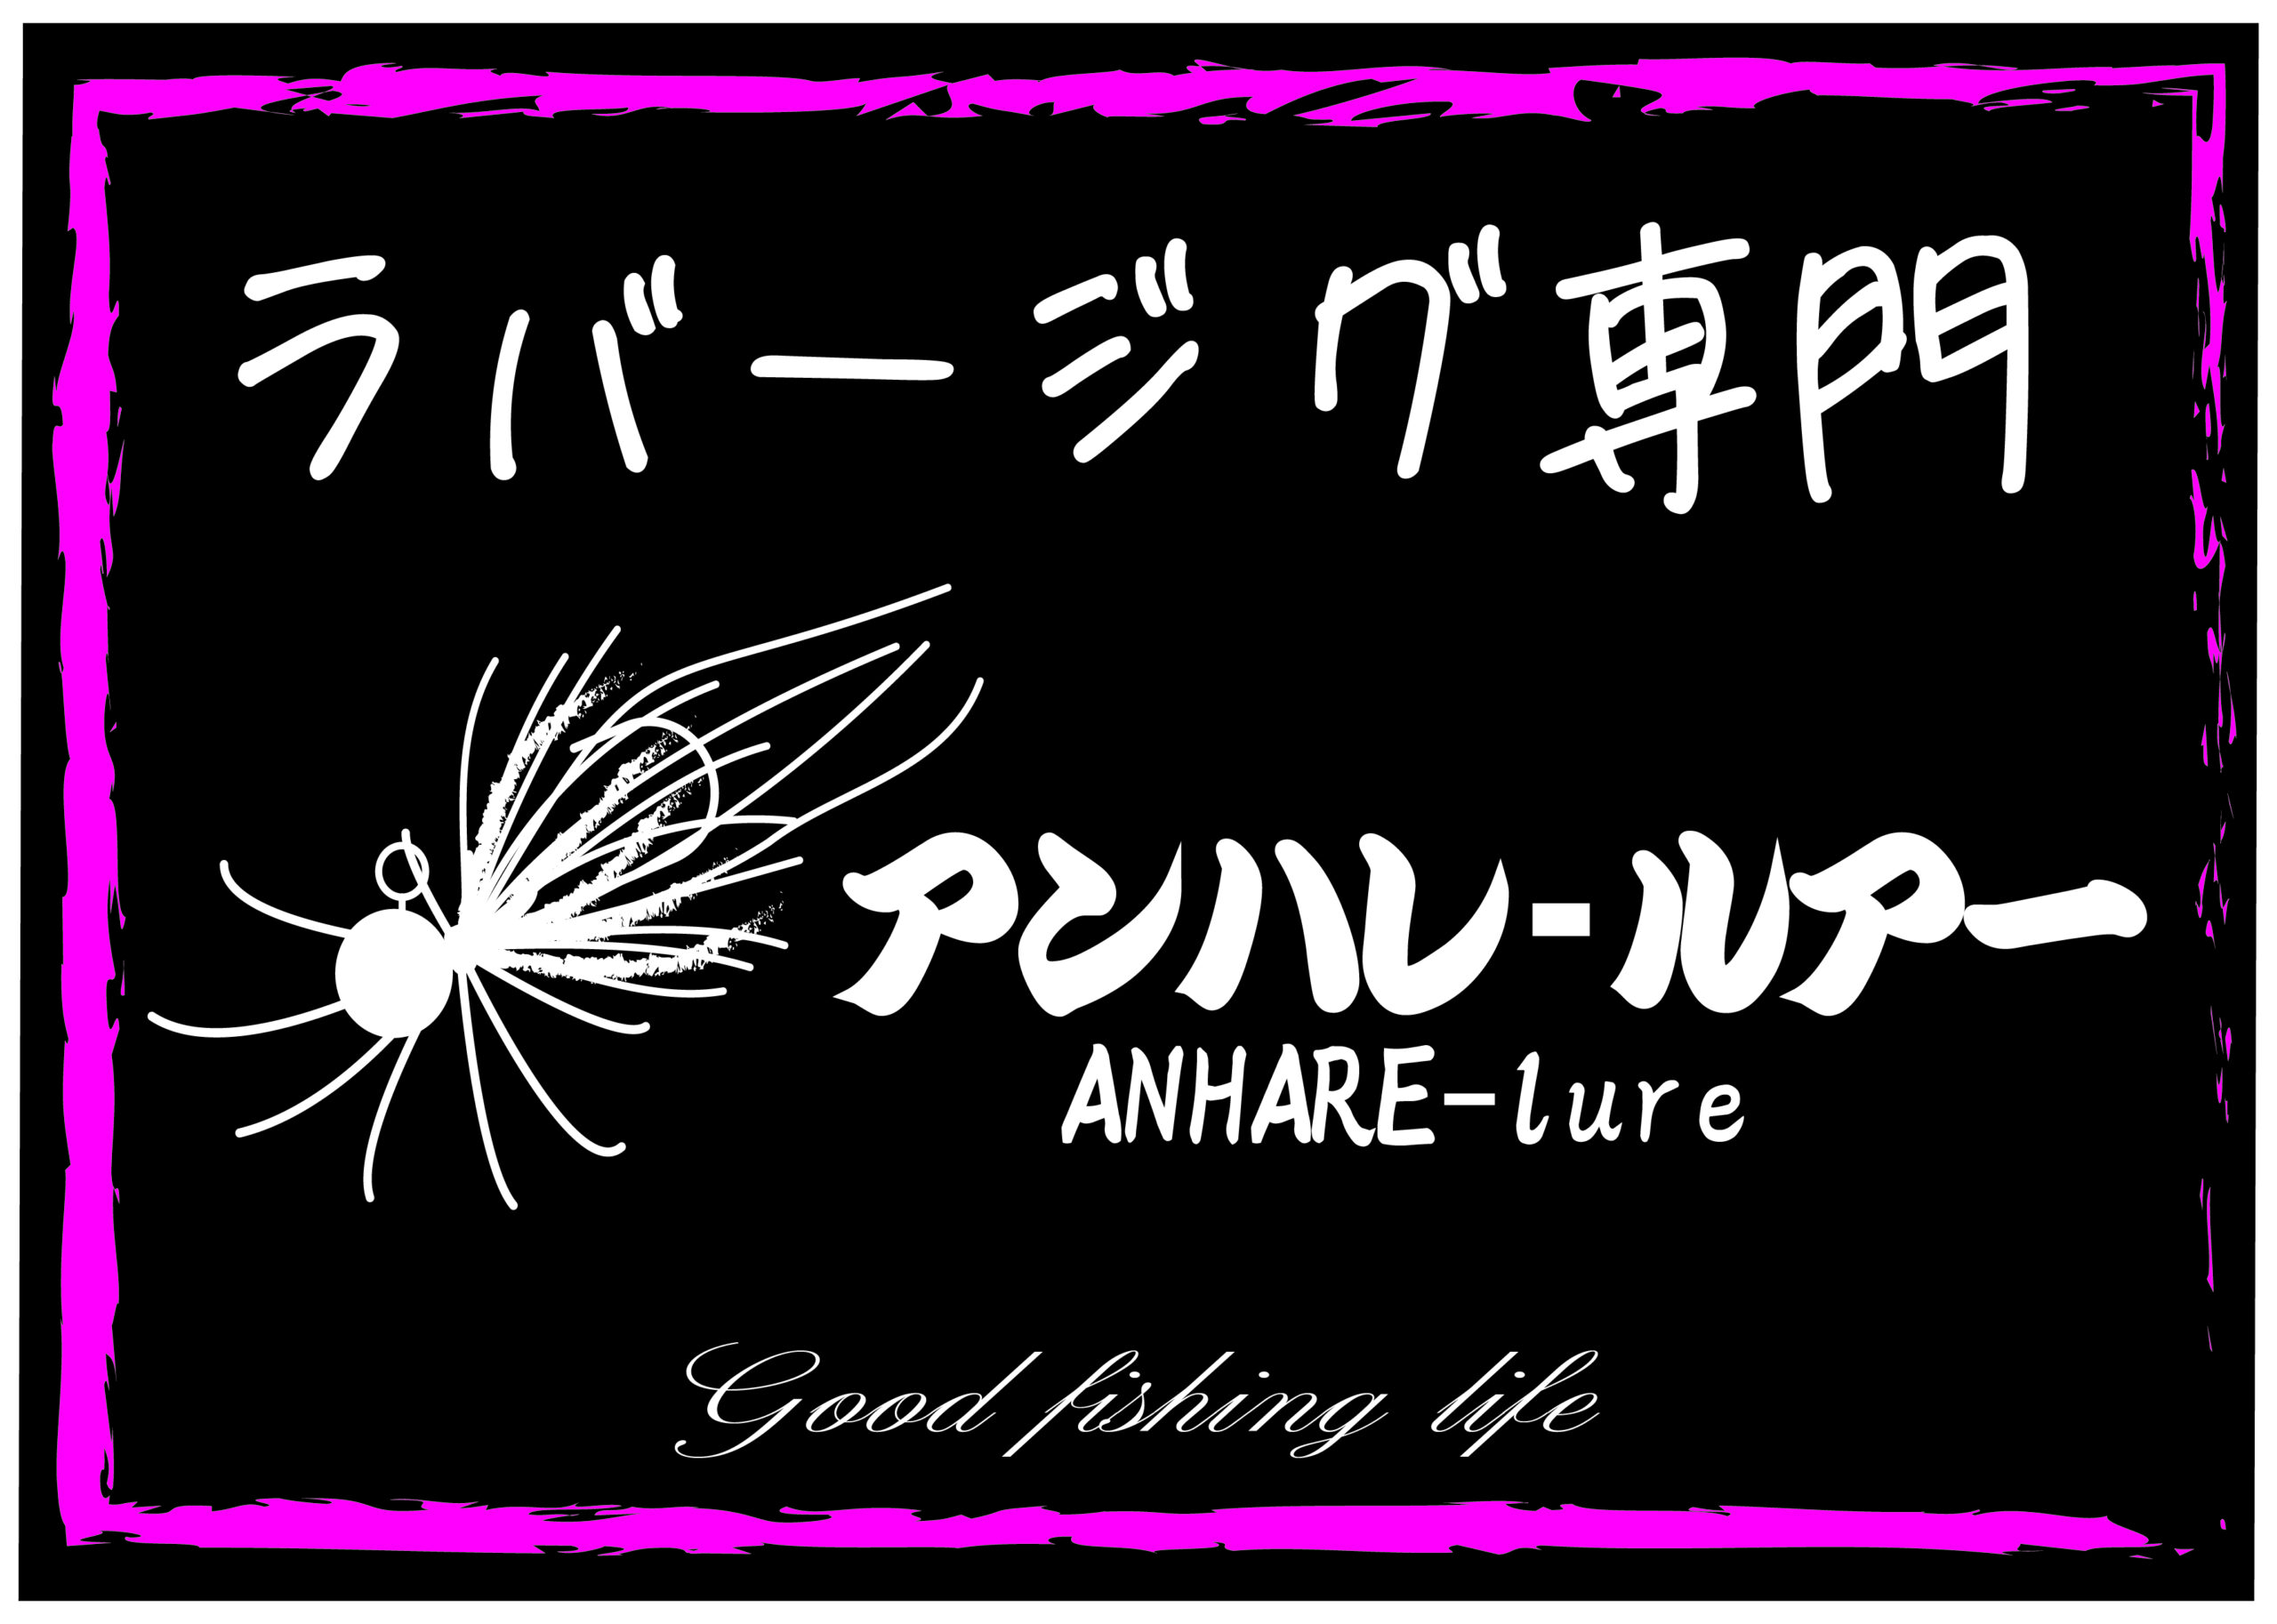 ANHARE_lure